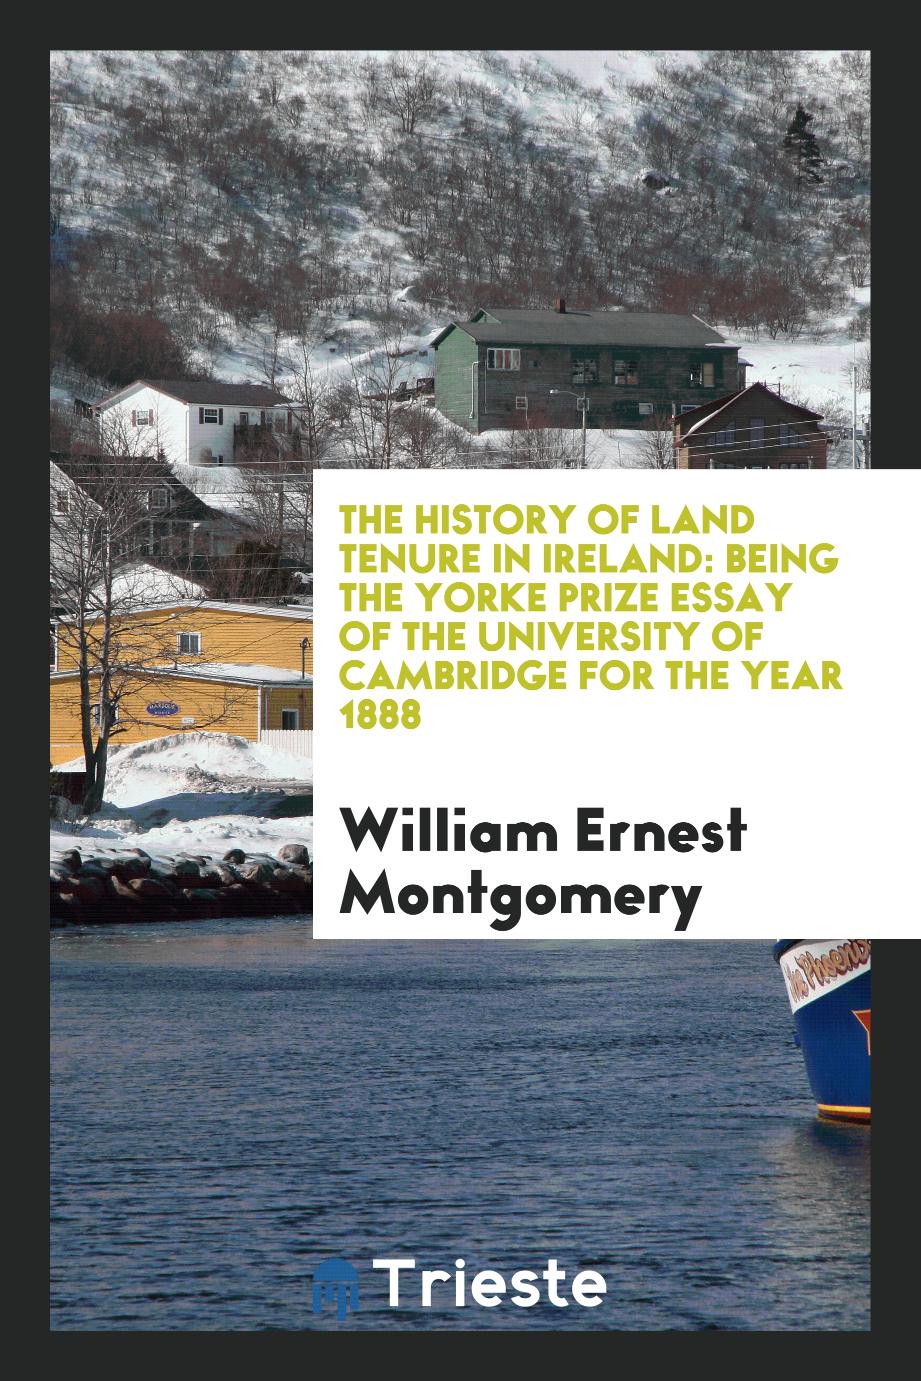 The history of land tenure in Ireland: being the Yorke prize essay of the University of Cambridge for the year 1888